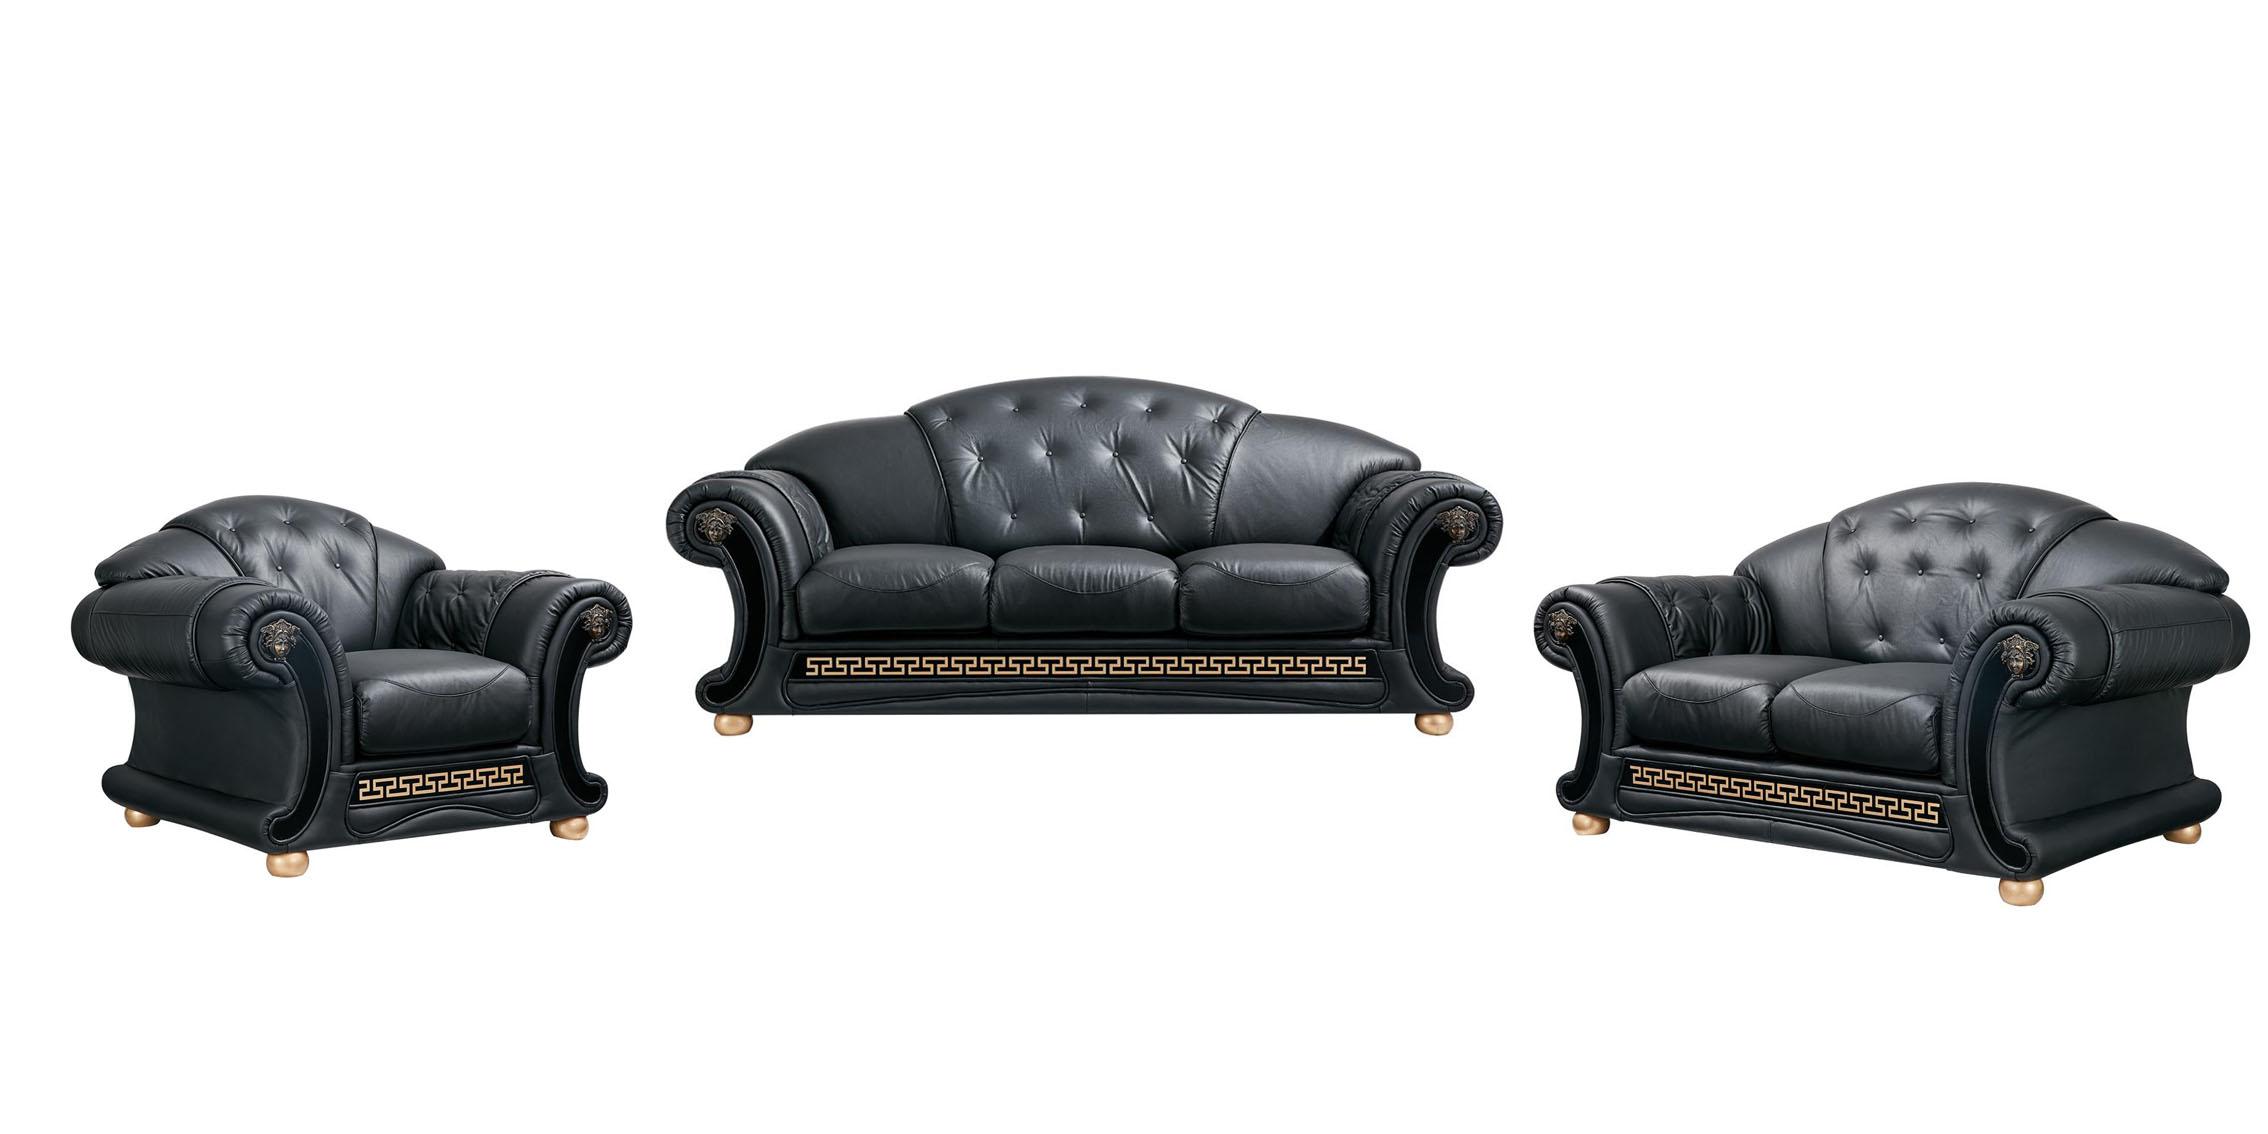 Traditional Sofa Loveseat and Chair Set Apolo ESF-Apolo Black-3PC in Black Top grain leather